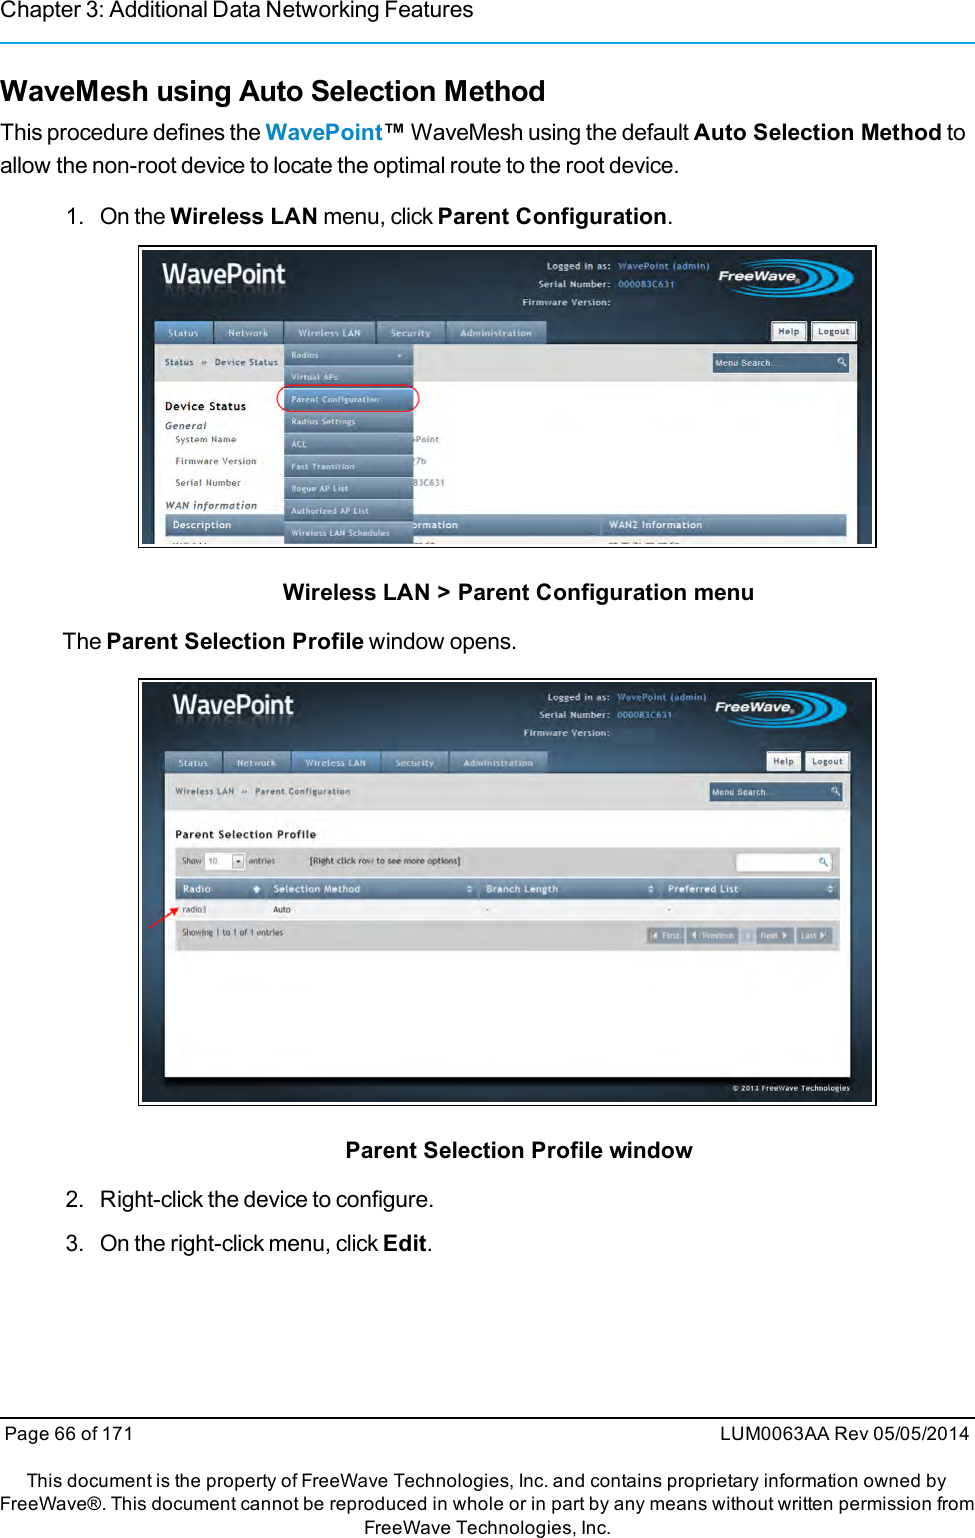 Chapter 3: Additional Data Networking FeaturesWaveMesh using Auto Selection MethodThis procedure defines the WavePoint™WaveMesh using the default Auto Selection Method toallow the non-root device to locate the optimal route to the root device.1. On the Wireless LAN menu, click Parent Configuration.Wireless LAN &gt; Parent Configuration menuThe Parent Selection Profile window opens.Parent Selection Profile window2. Right-click the device to configure.3. On the right-click menu, click Edit.Page 66 of 171 LUM0063AA Rev 05/05/2014This document is the property of FreeWave Technologies, Inc. and contains proprietary information owned byFreeWave®. This document cannot be reproduced in whole or in part by any means without written permission fromFreeWave Technologies, Inc.